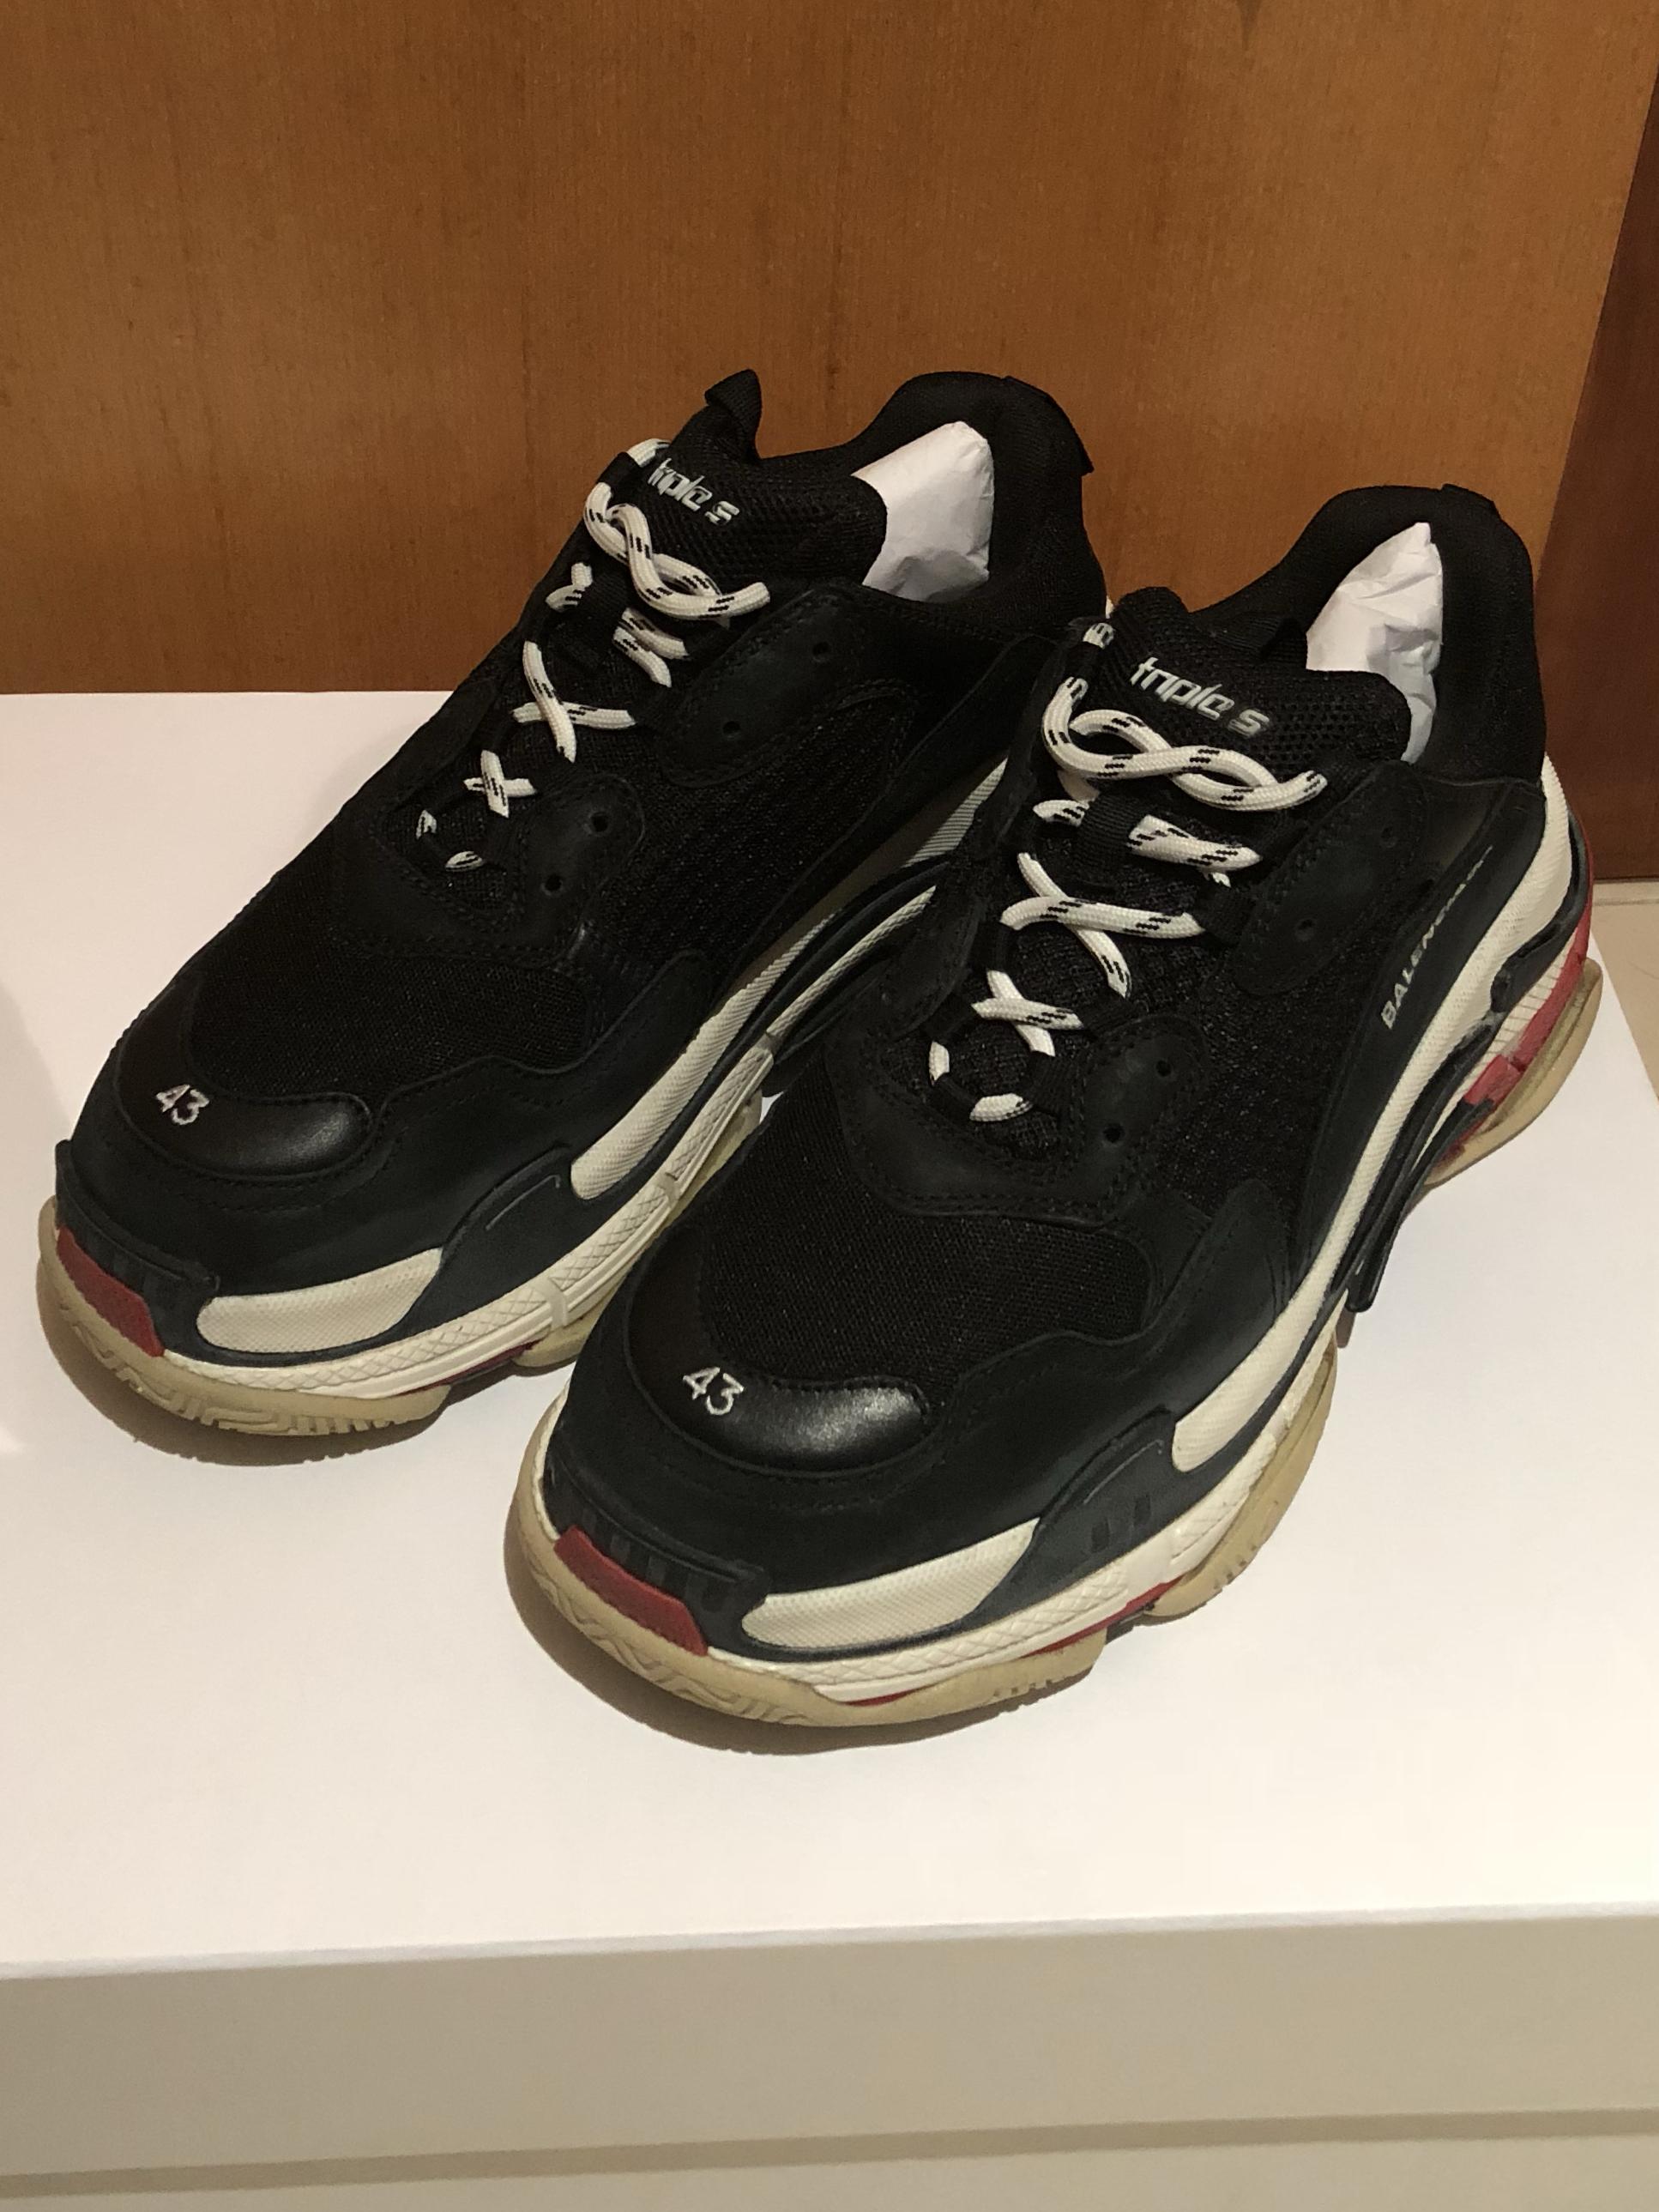 Balenciaga Triple S Continues The Dad Shoe Vibes With